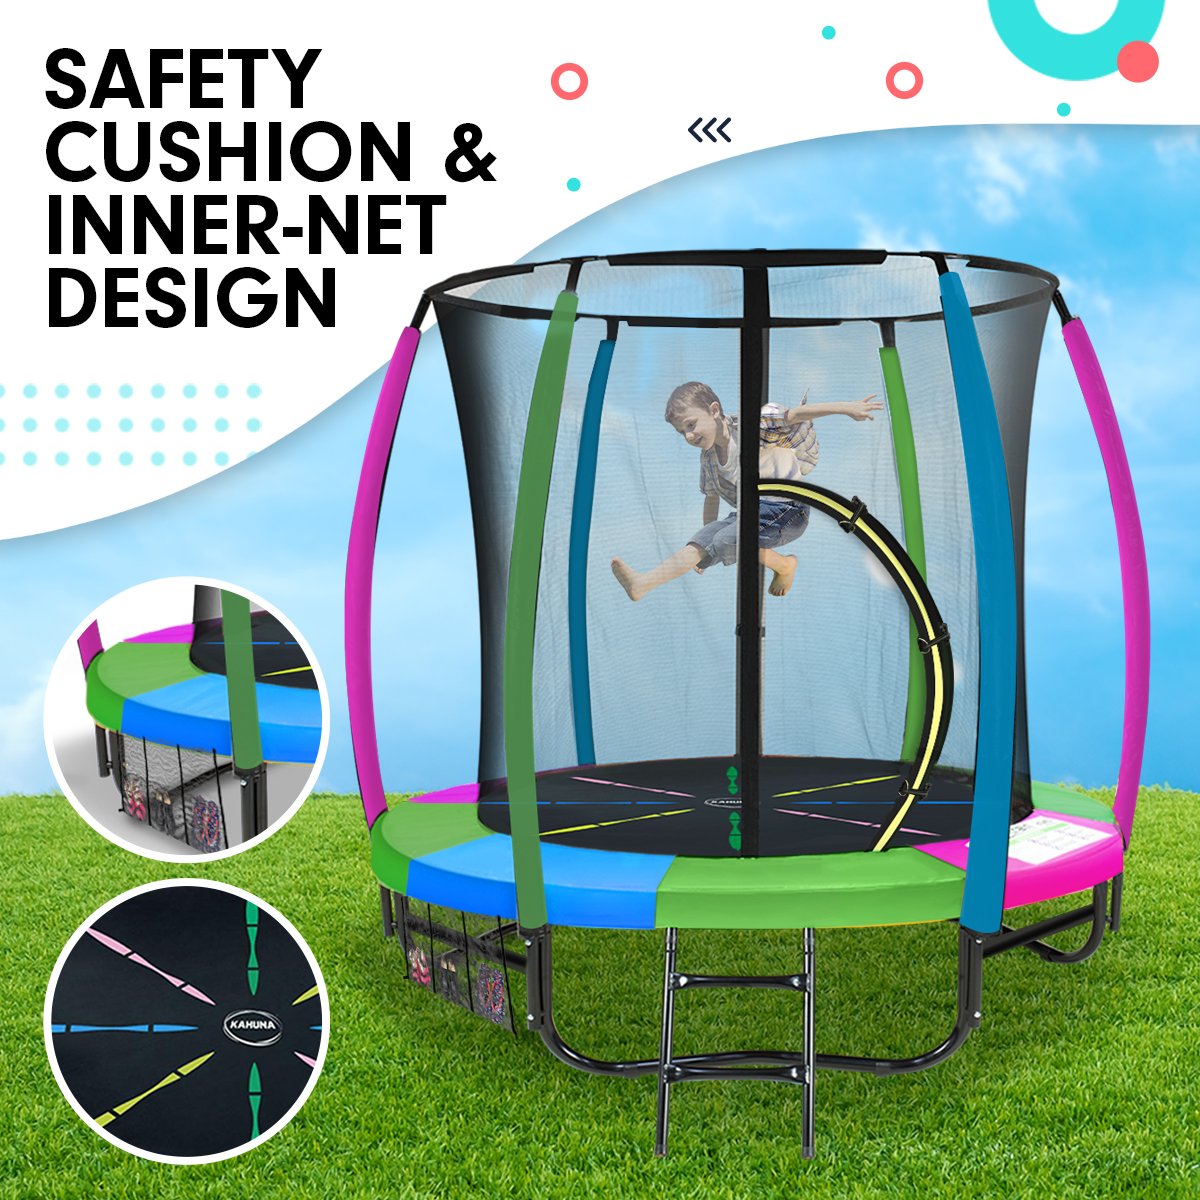 Kahuna 6 ft Trampoline with Rainbow Safety Pad